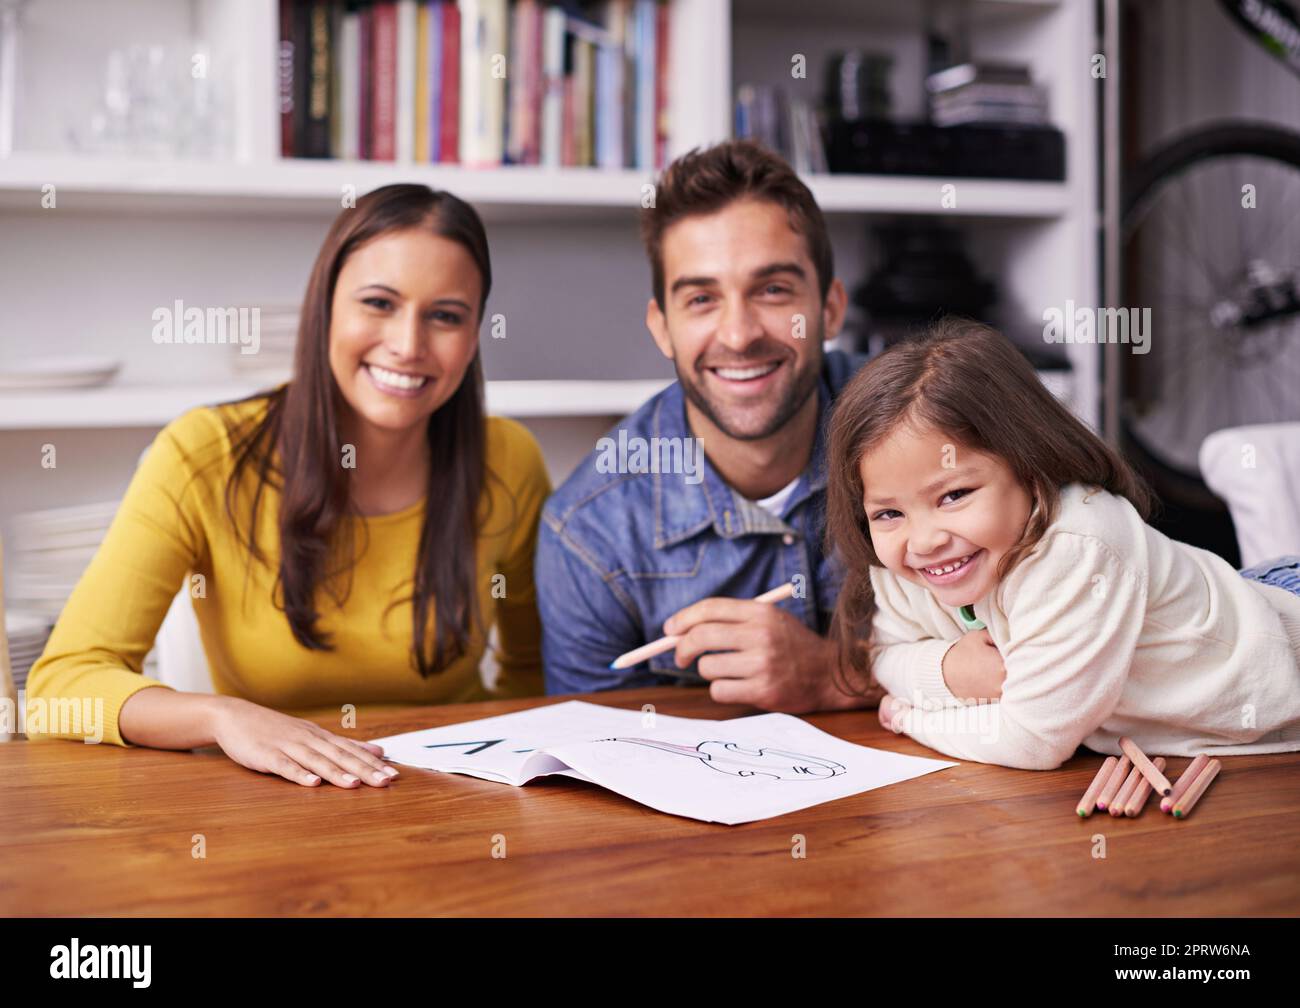 Every child is an artist. a young family doing art work together. Stock Photo